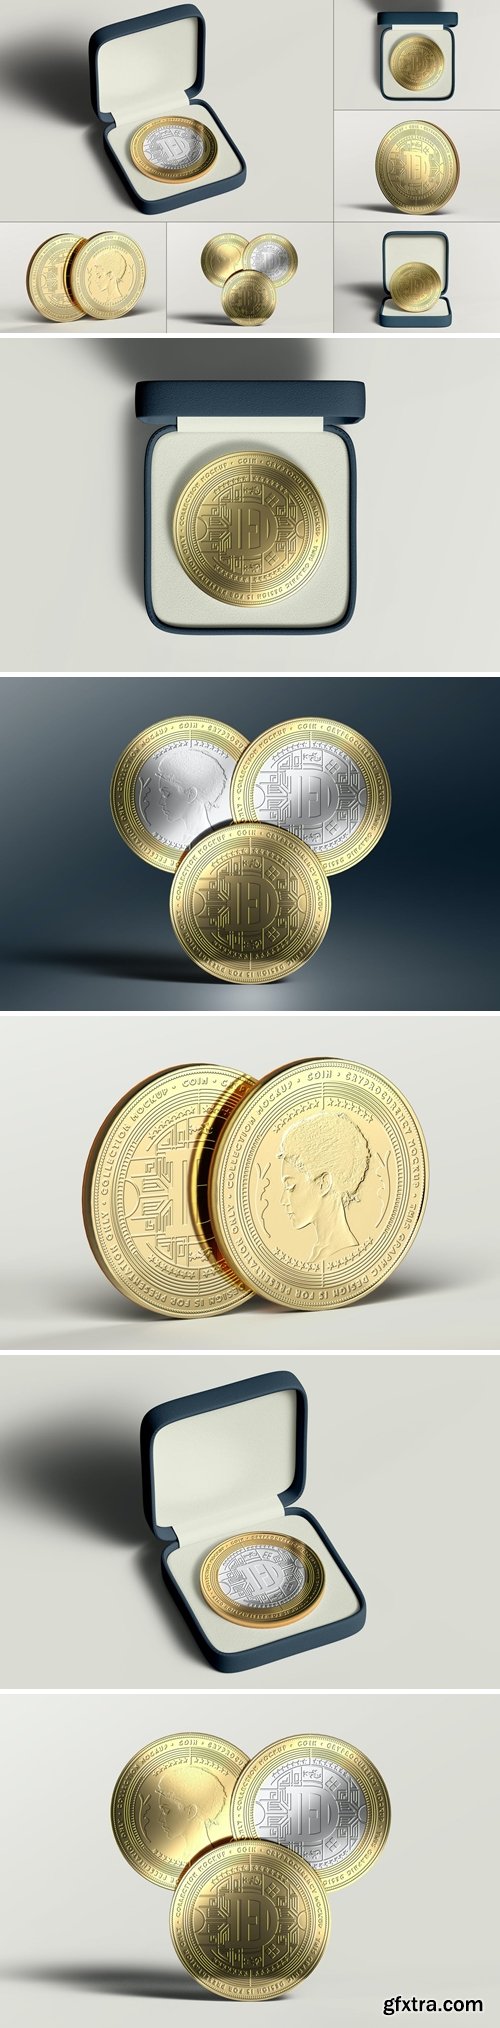 Coin Mock-up 2